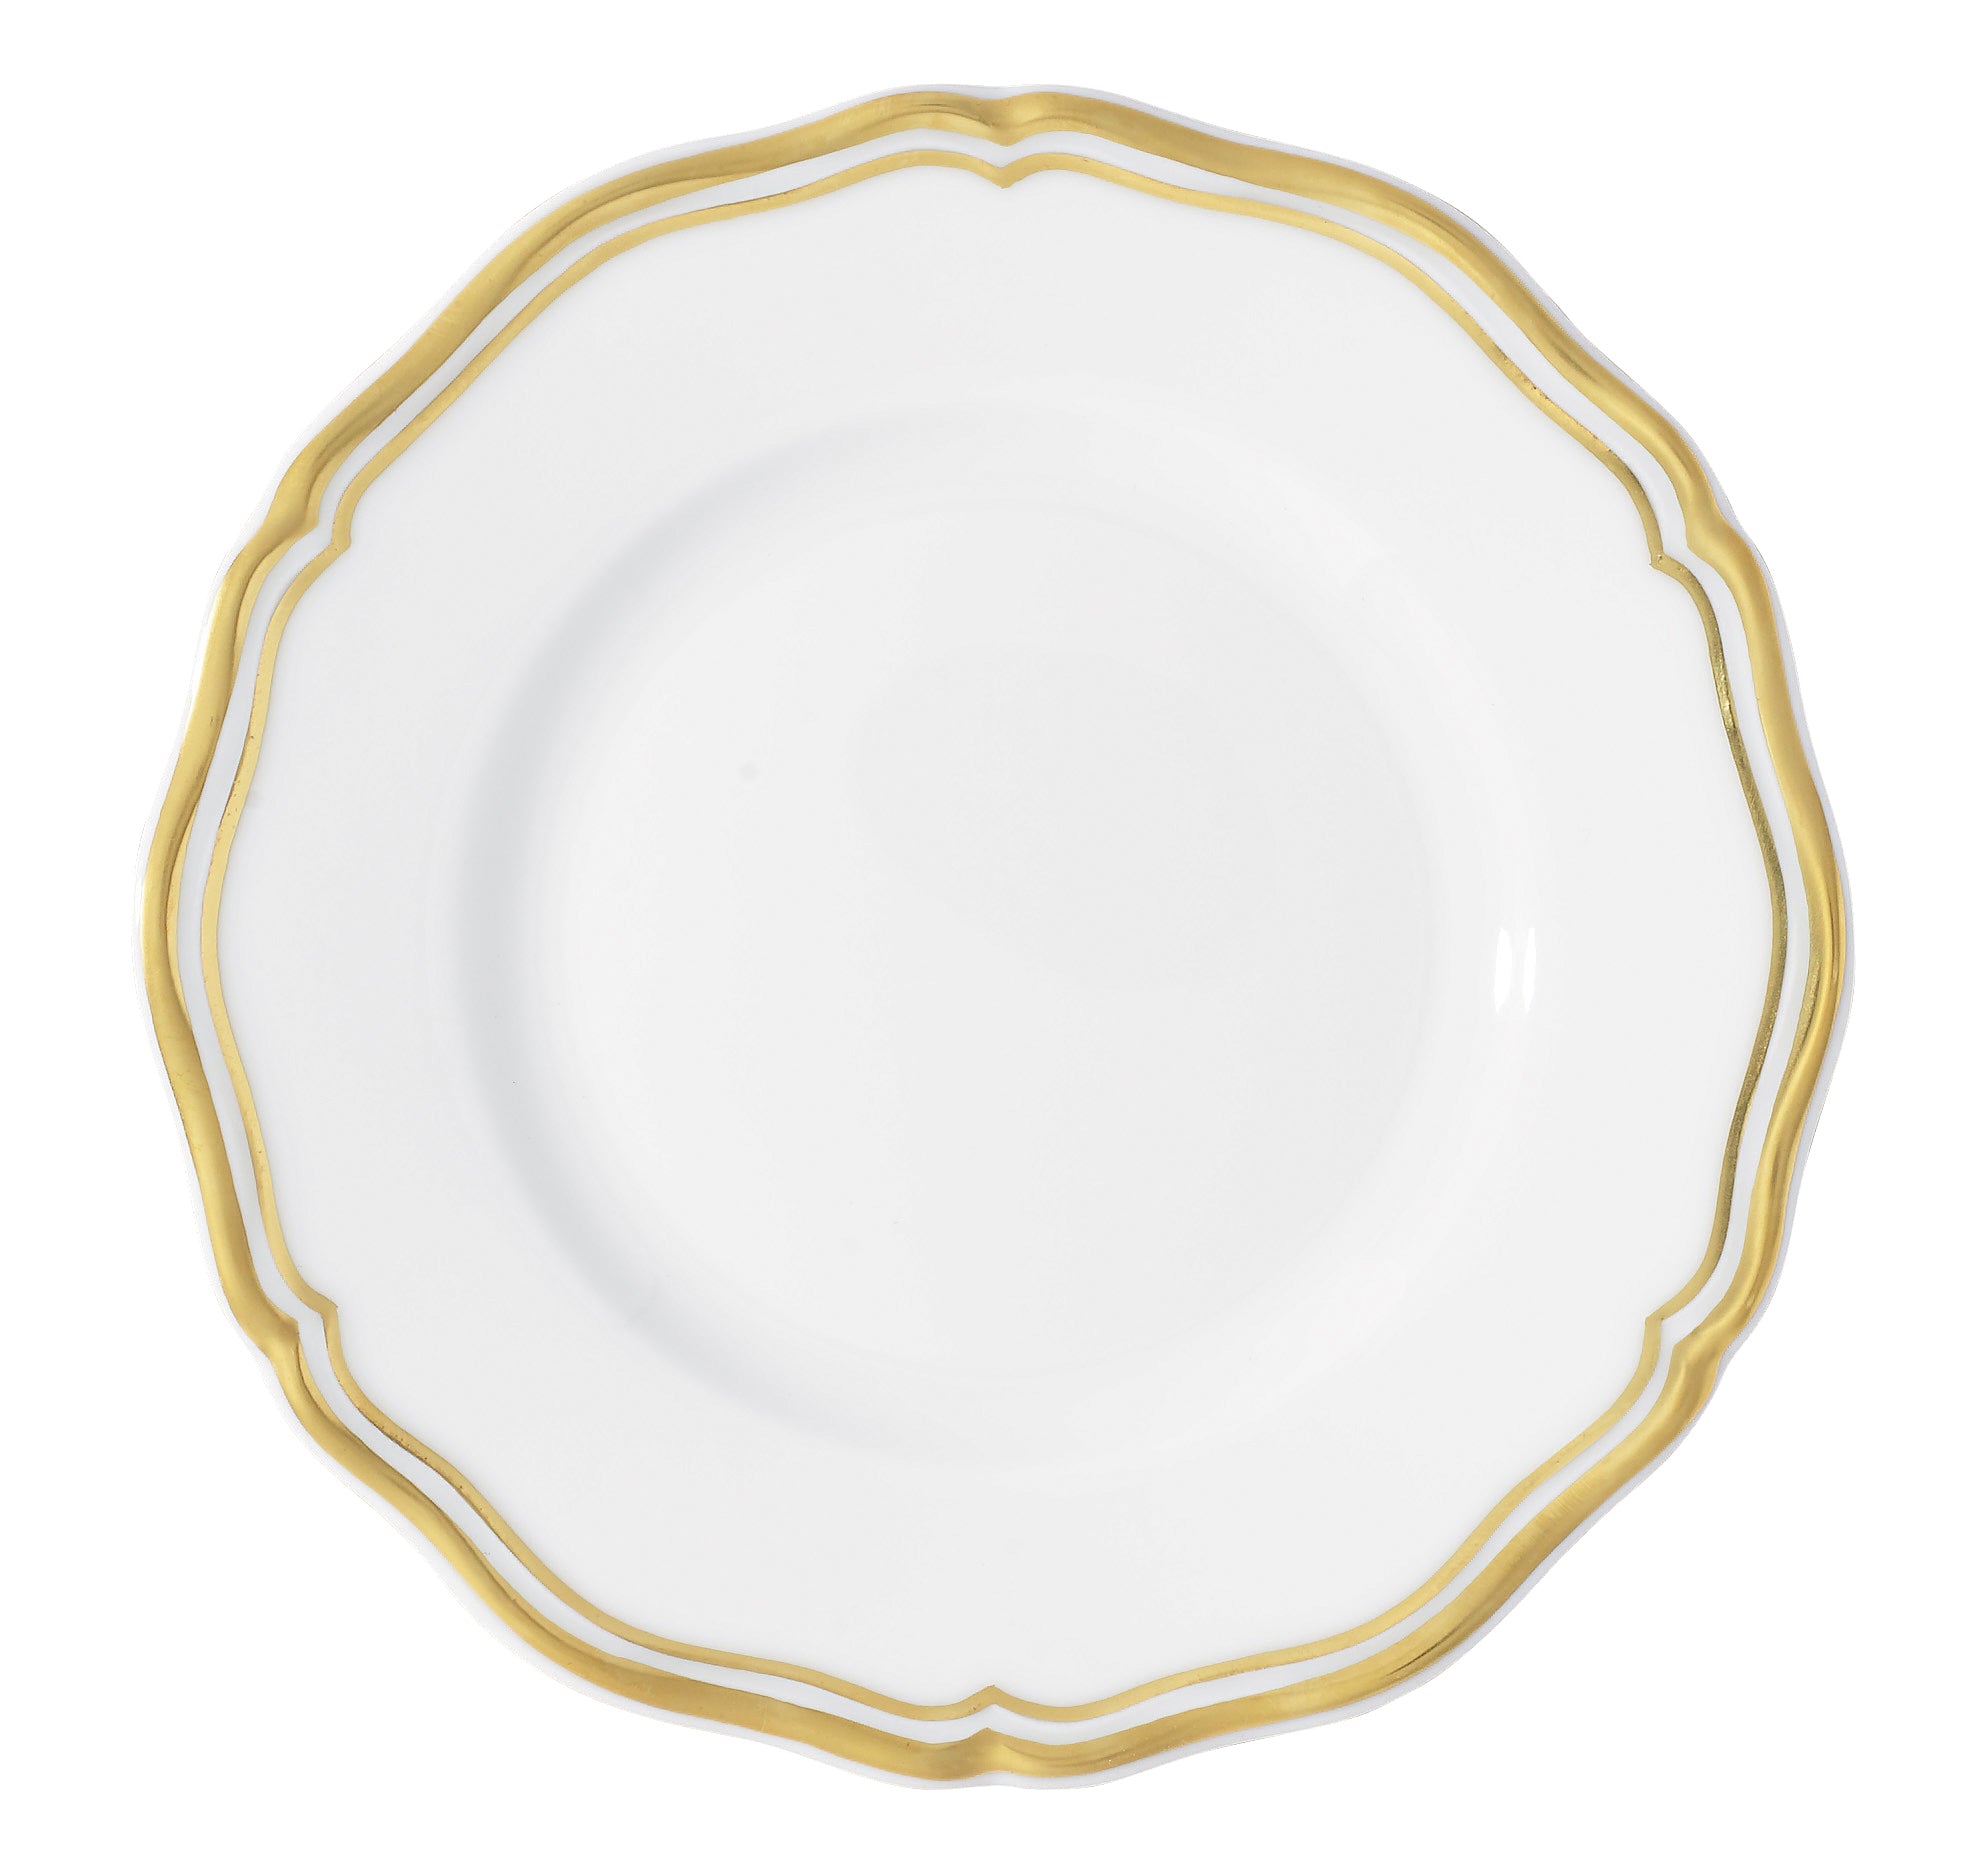 Polka Or - Bread & Butter Plate 6.3 in